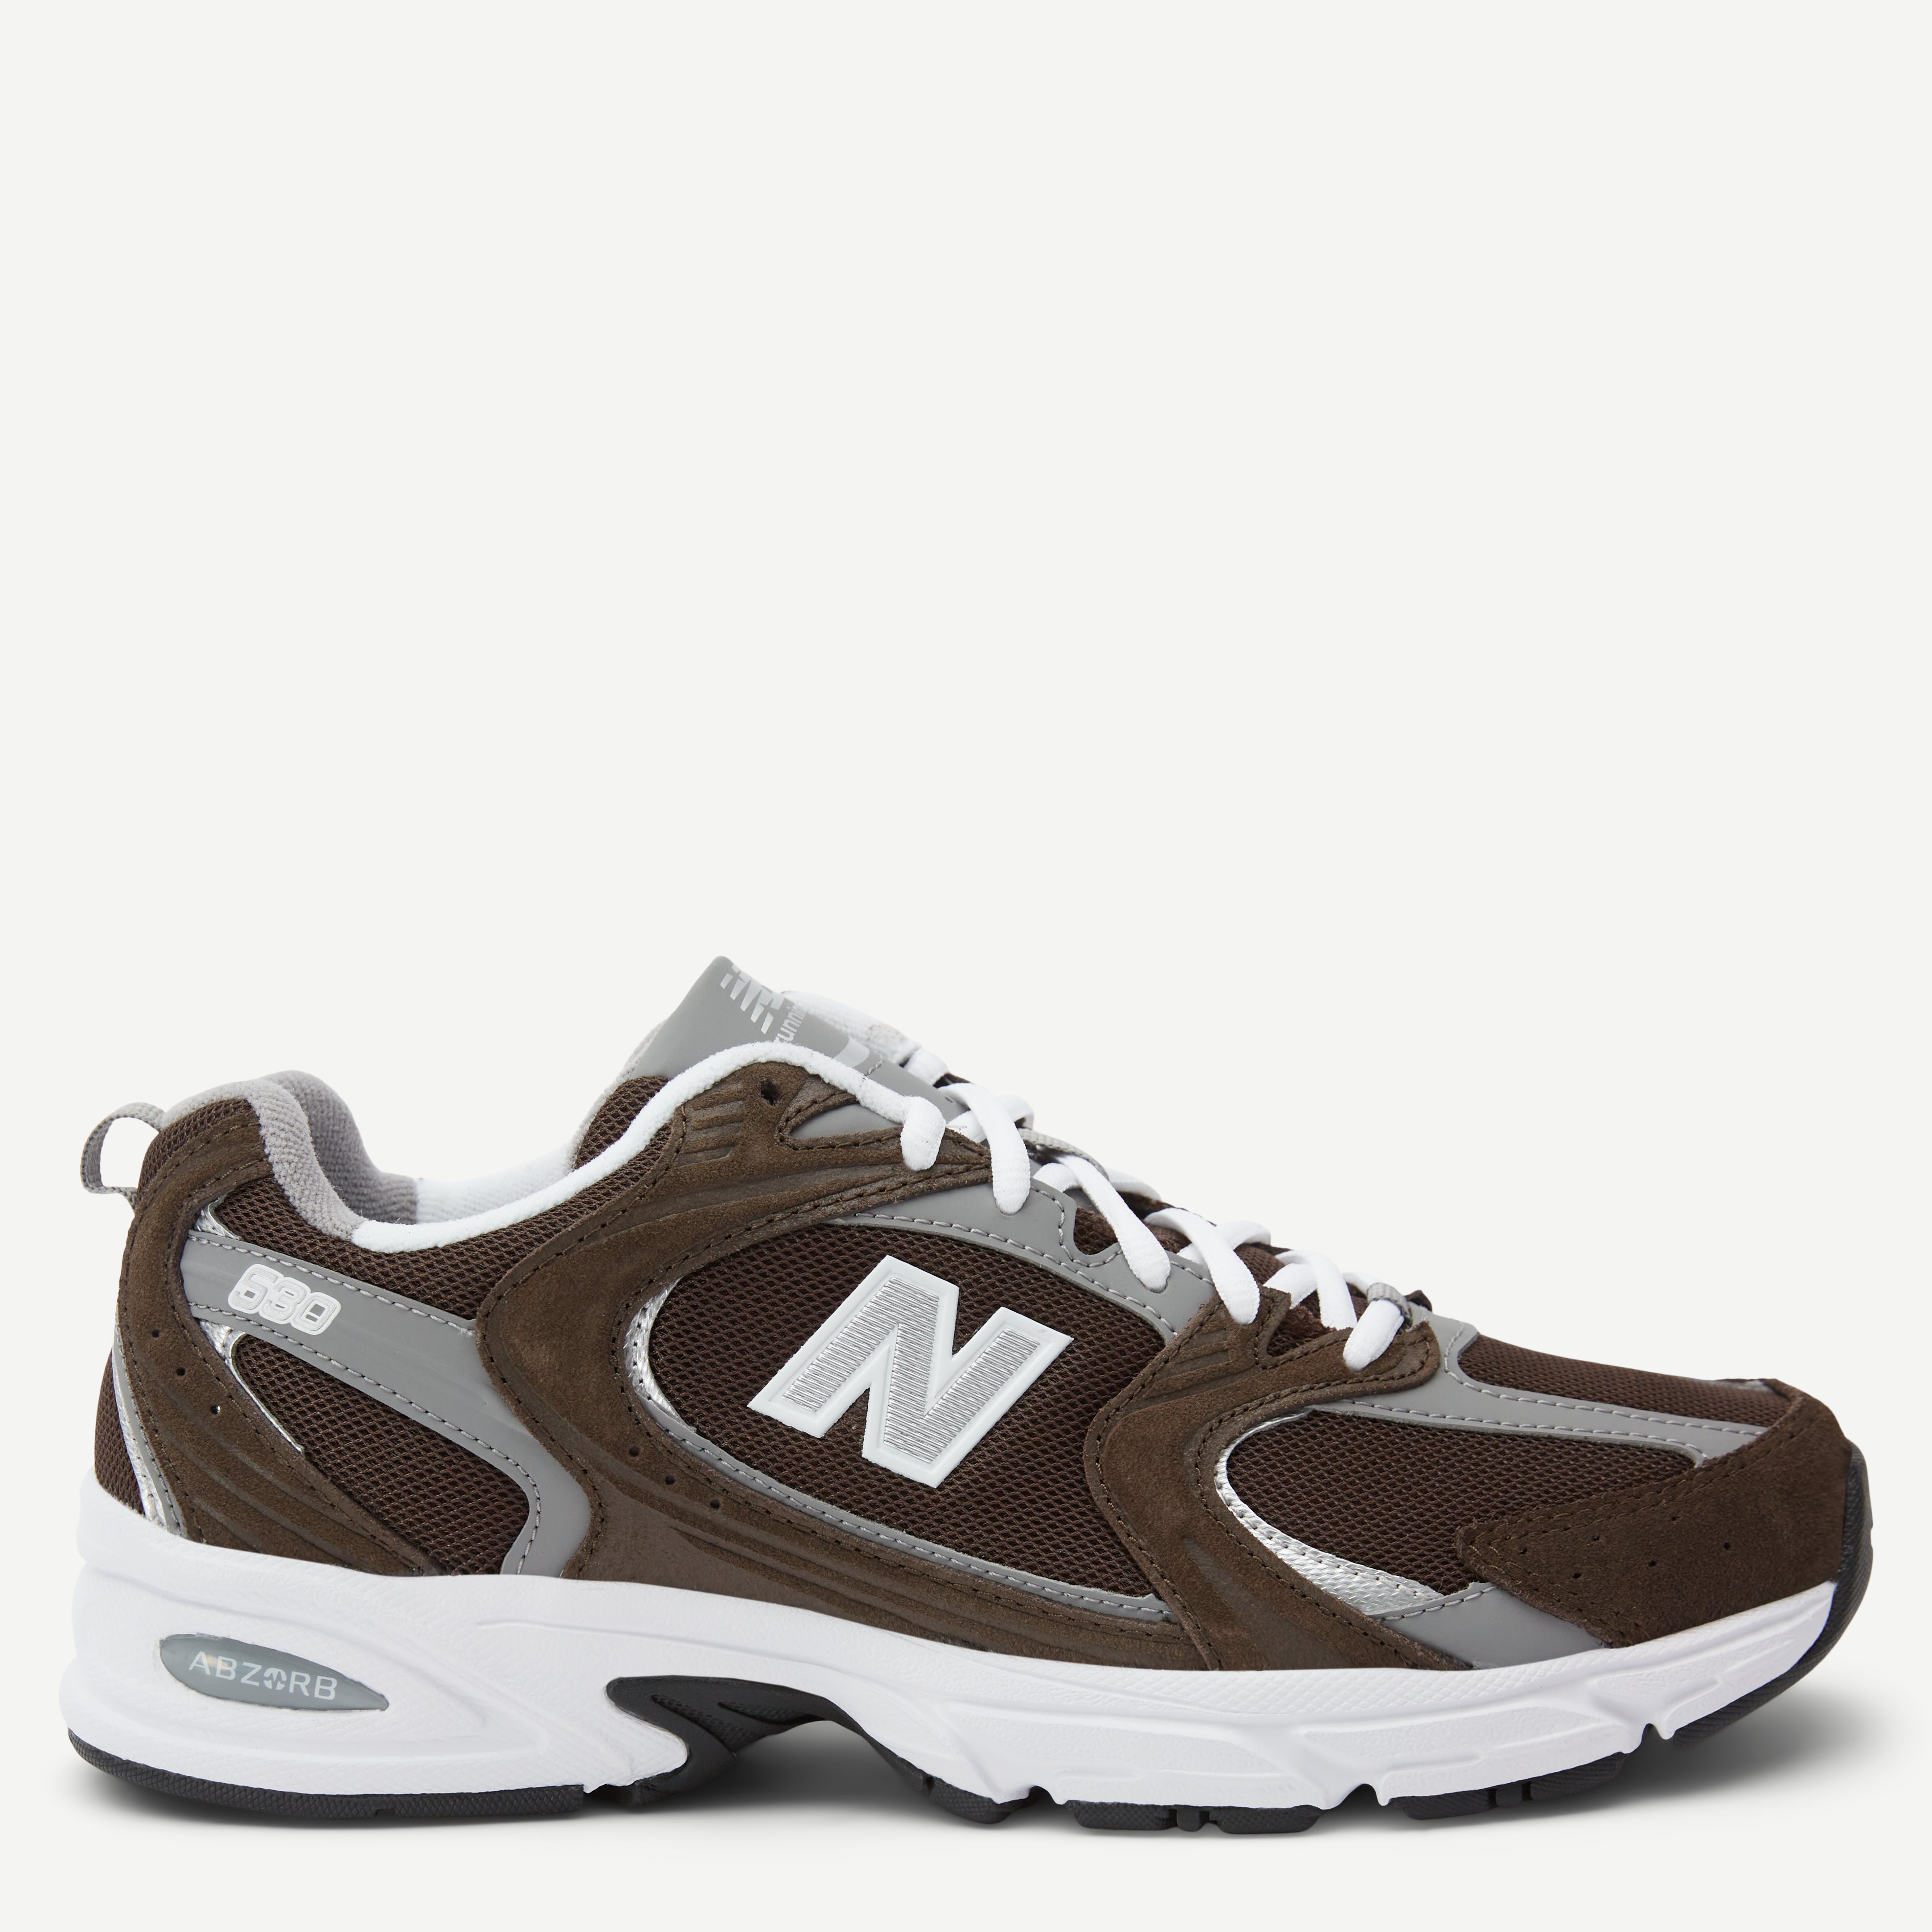 New Balance Shoes MR530 CL Brown